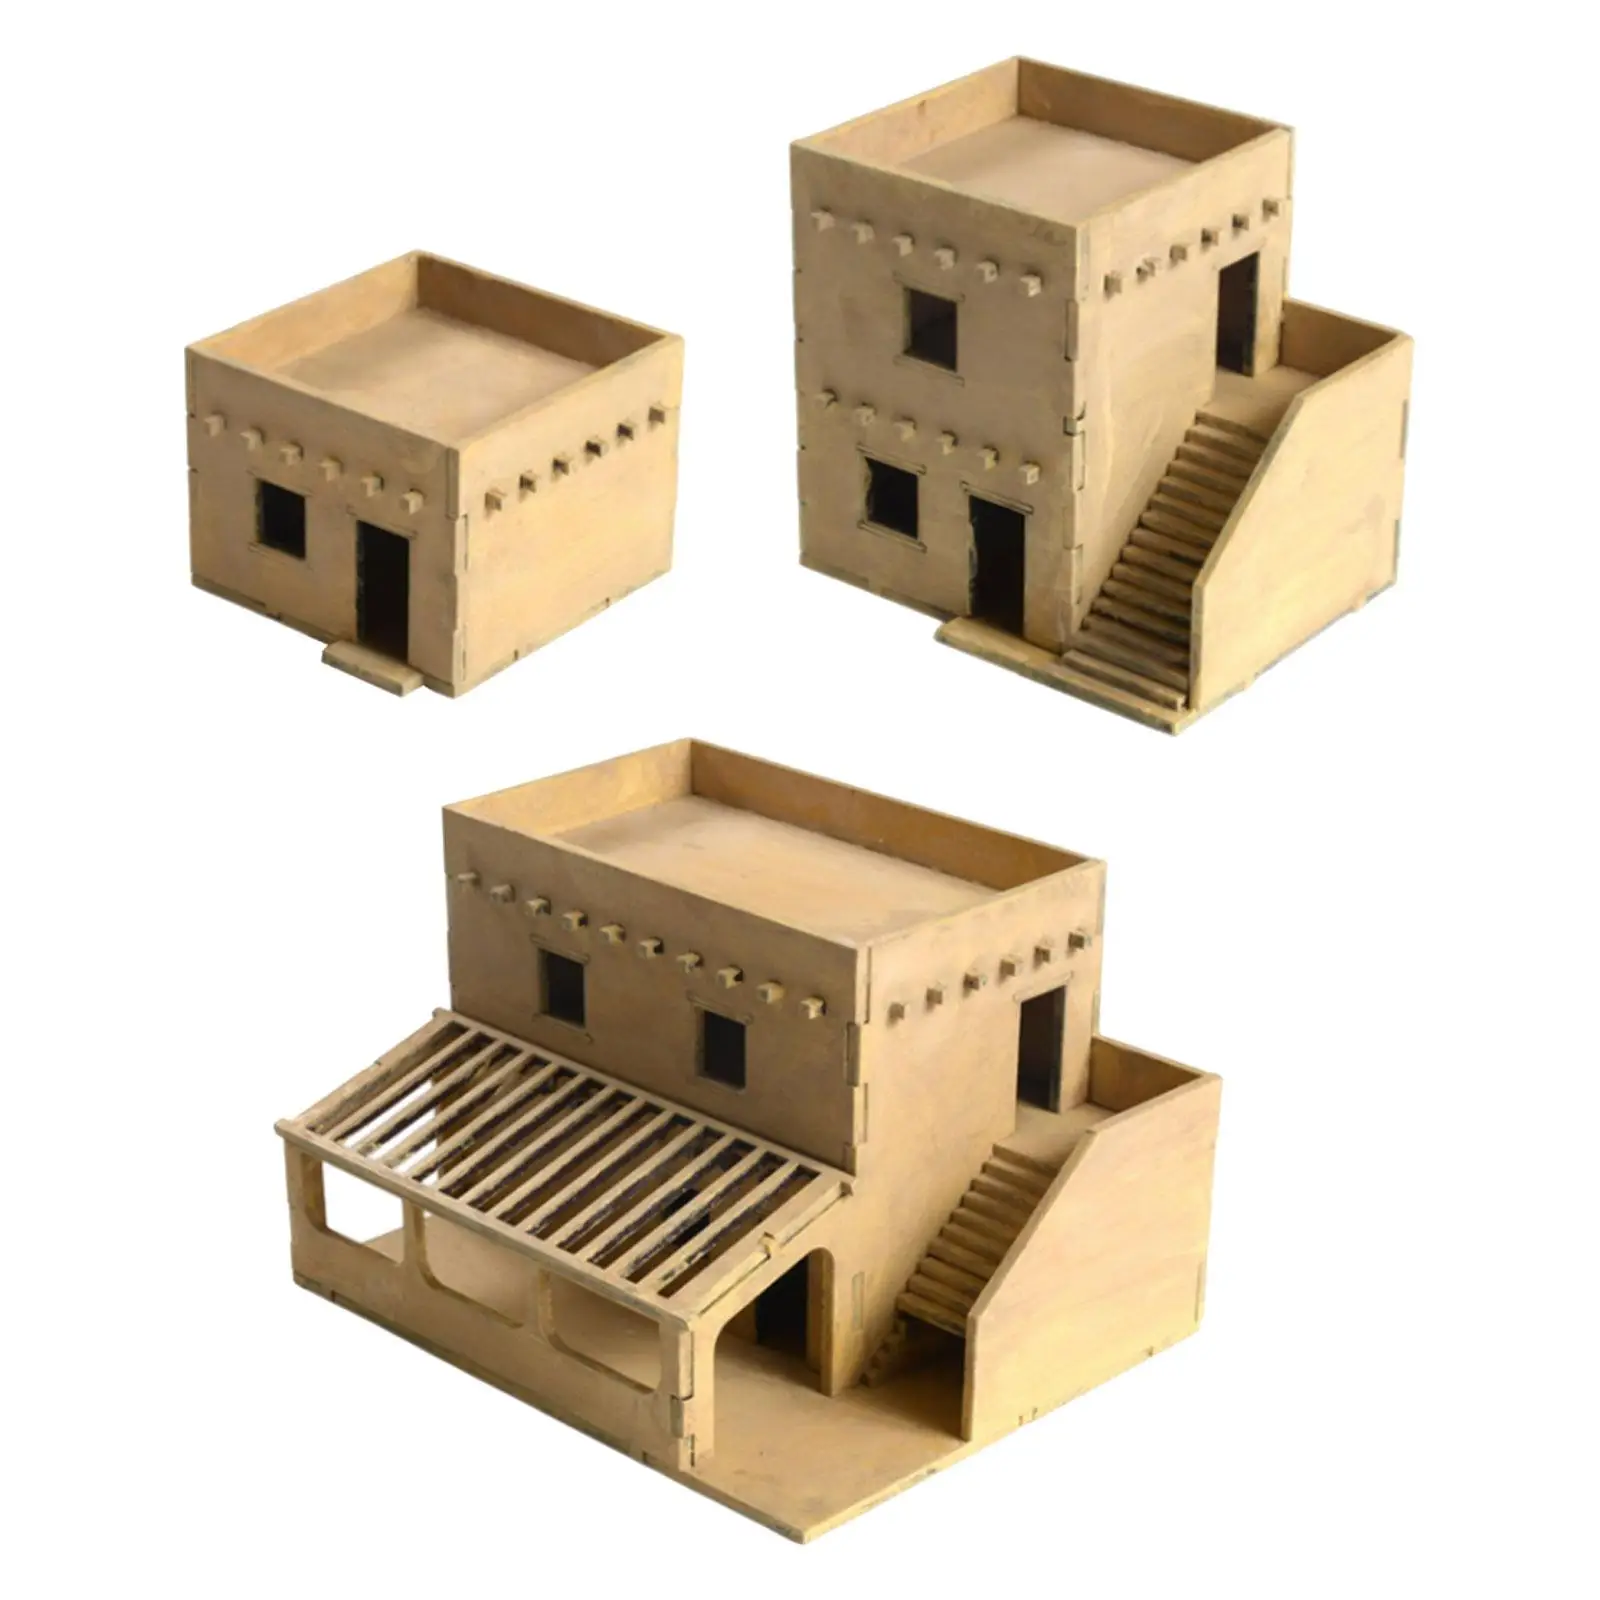 

1/72 Miniature Wooden House Architecture Scene Layout Scenery for Sand Table Micro Landscape Diorama Model Railway Accessory